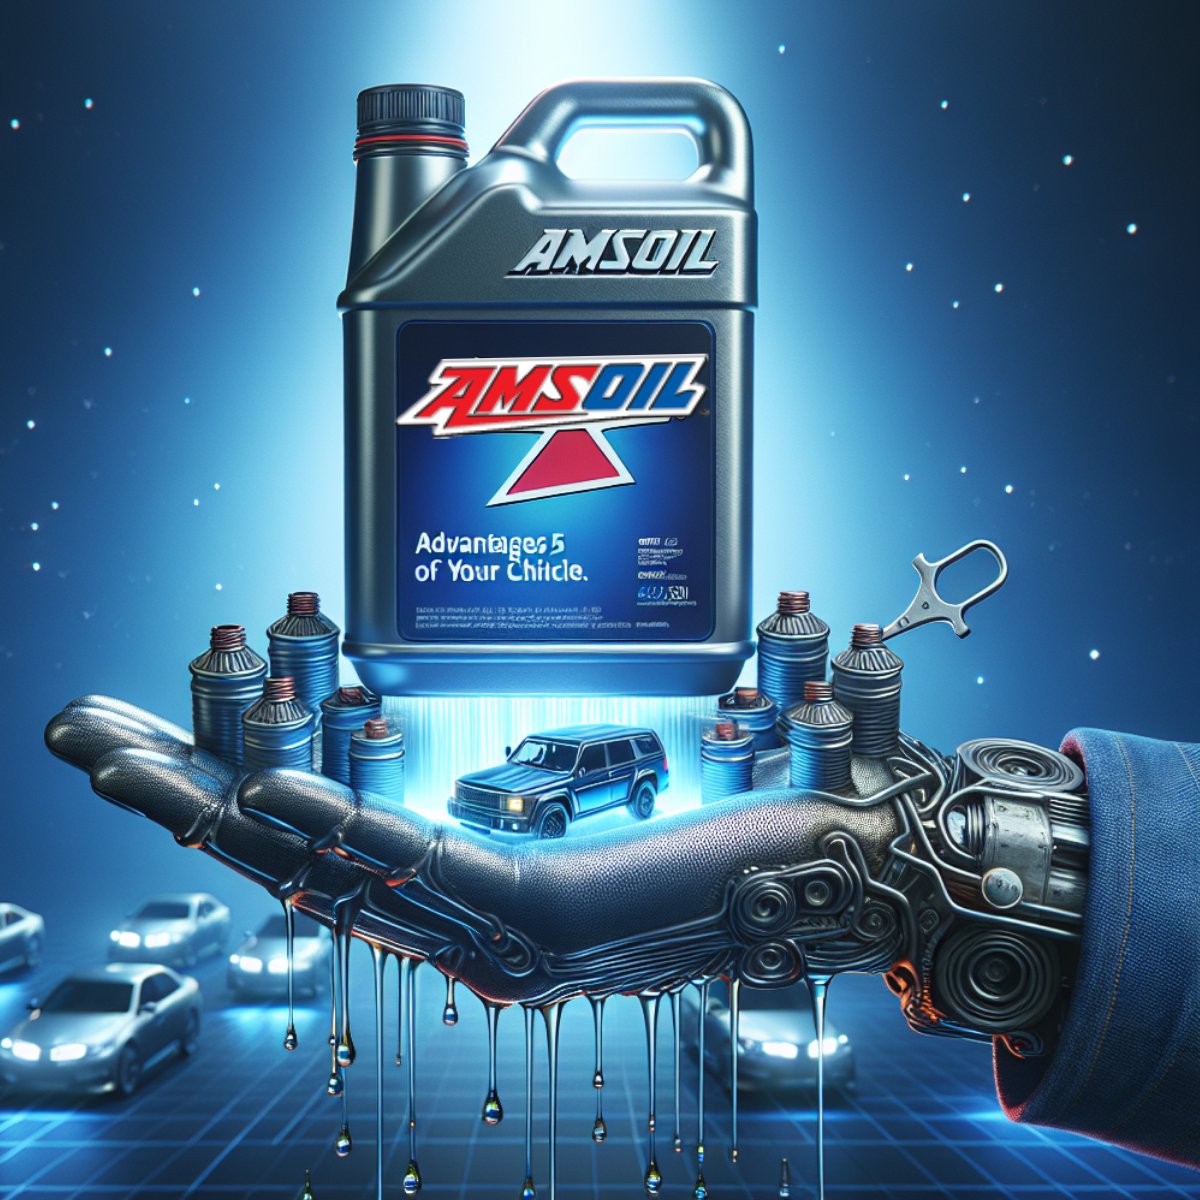 Upgrade your engine's performance with AMSOIL – the smart choice for superior reliability, performance, and peace of mind. #AMSOIL #Vyscocity #EnginePerformance #Reliability 
vyscocity.com/top-advantages…